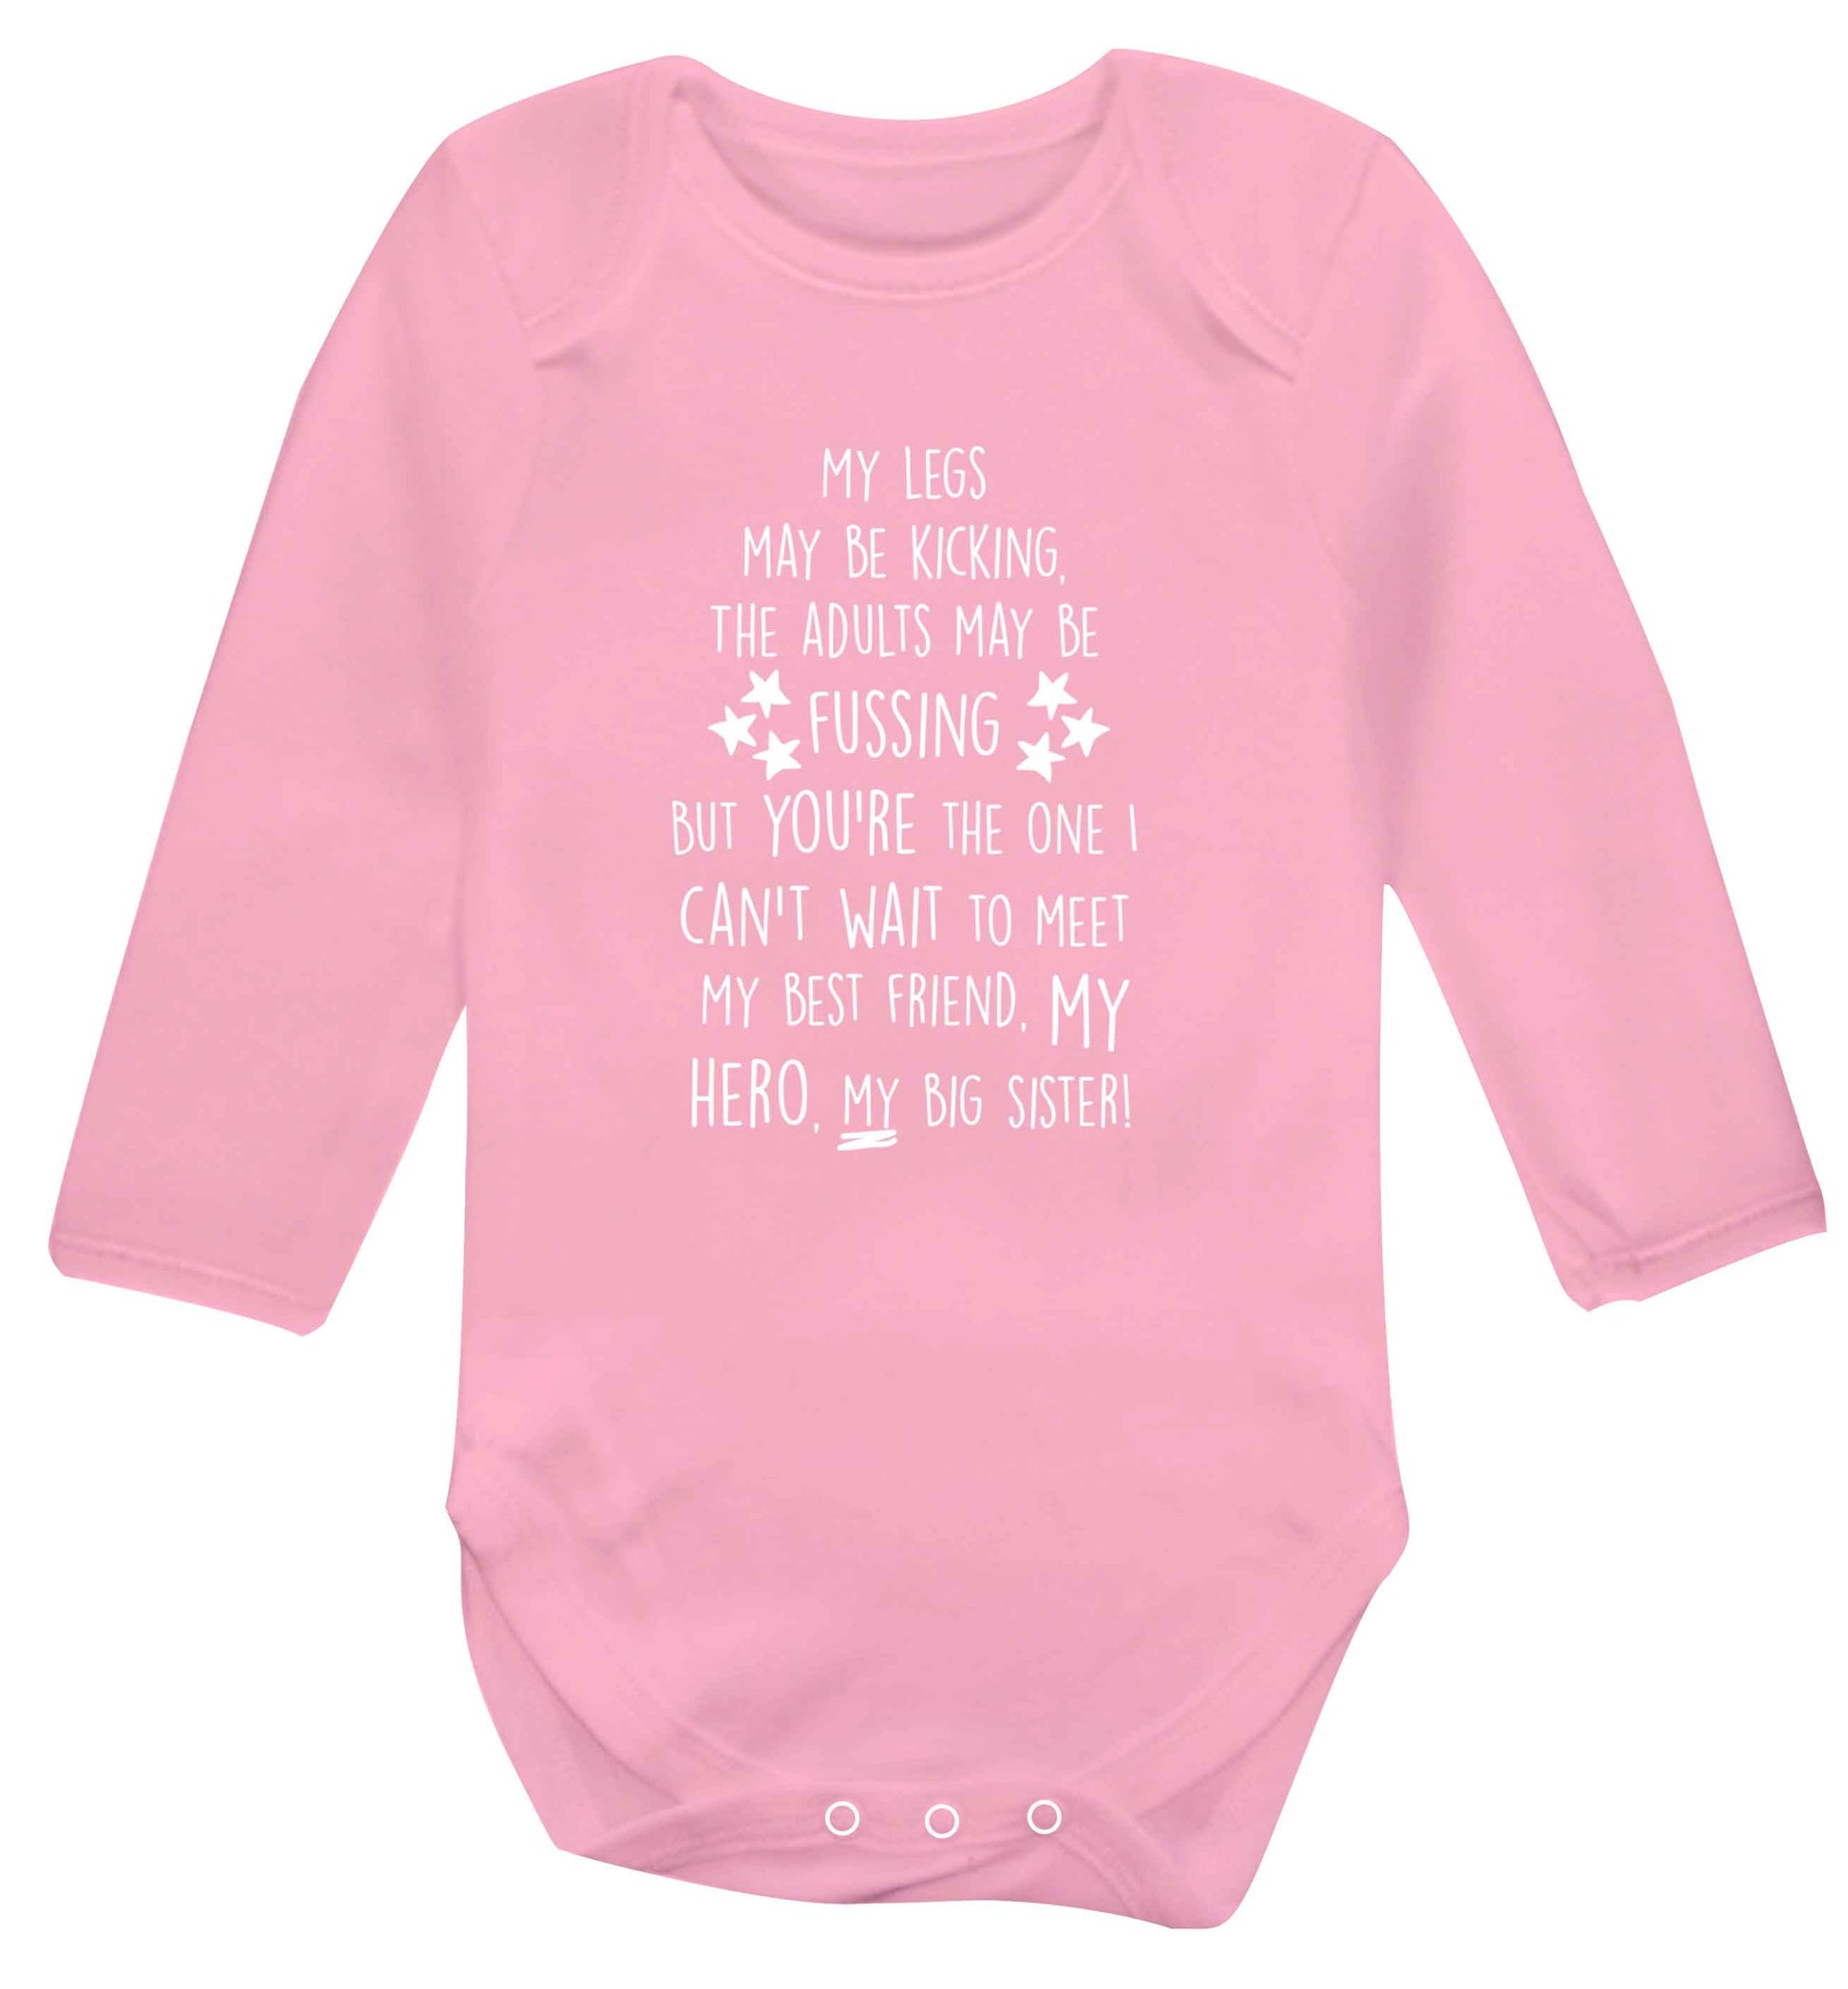 A poem from bump to big sister Baby Vest long sleeved pale pink 6-12 months